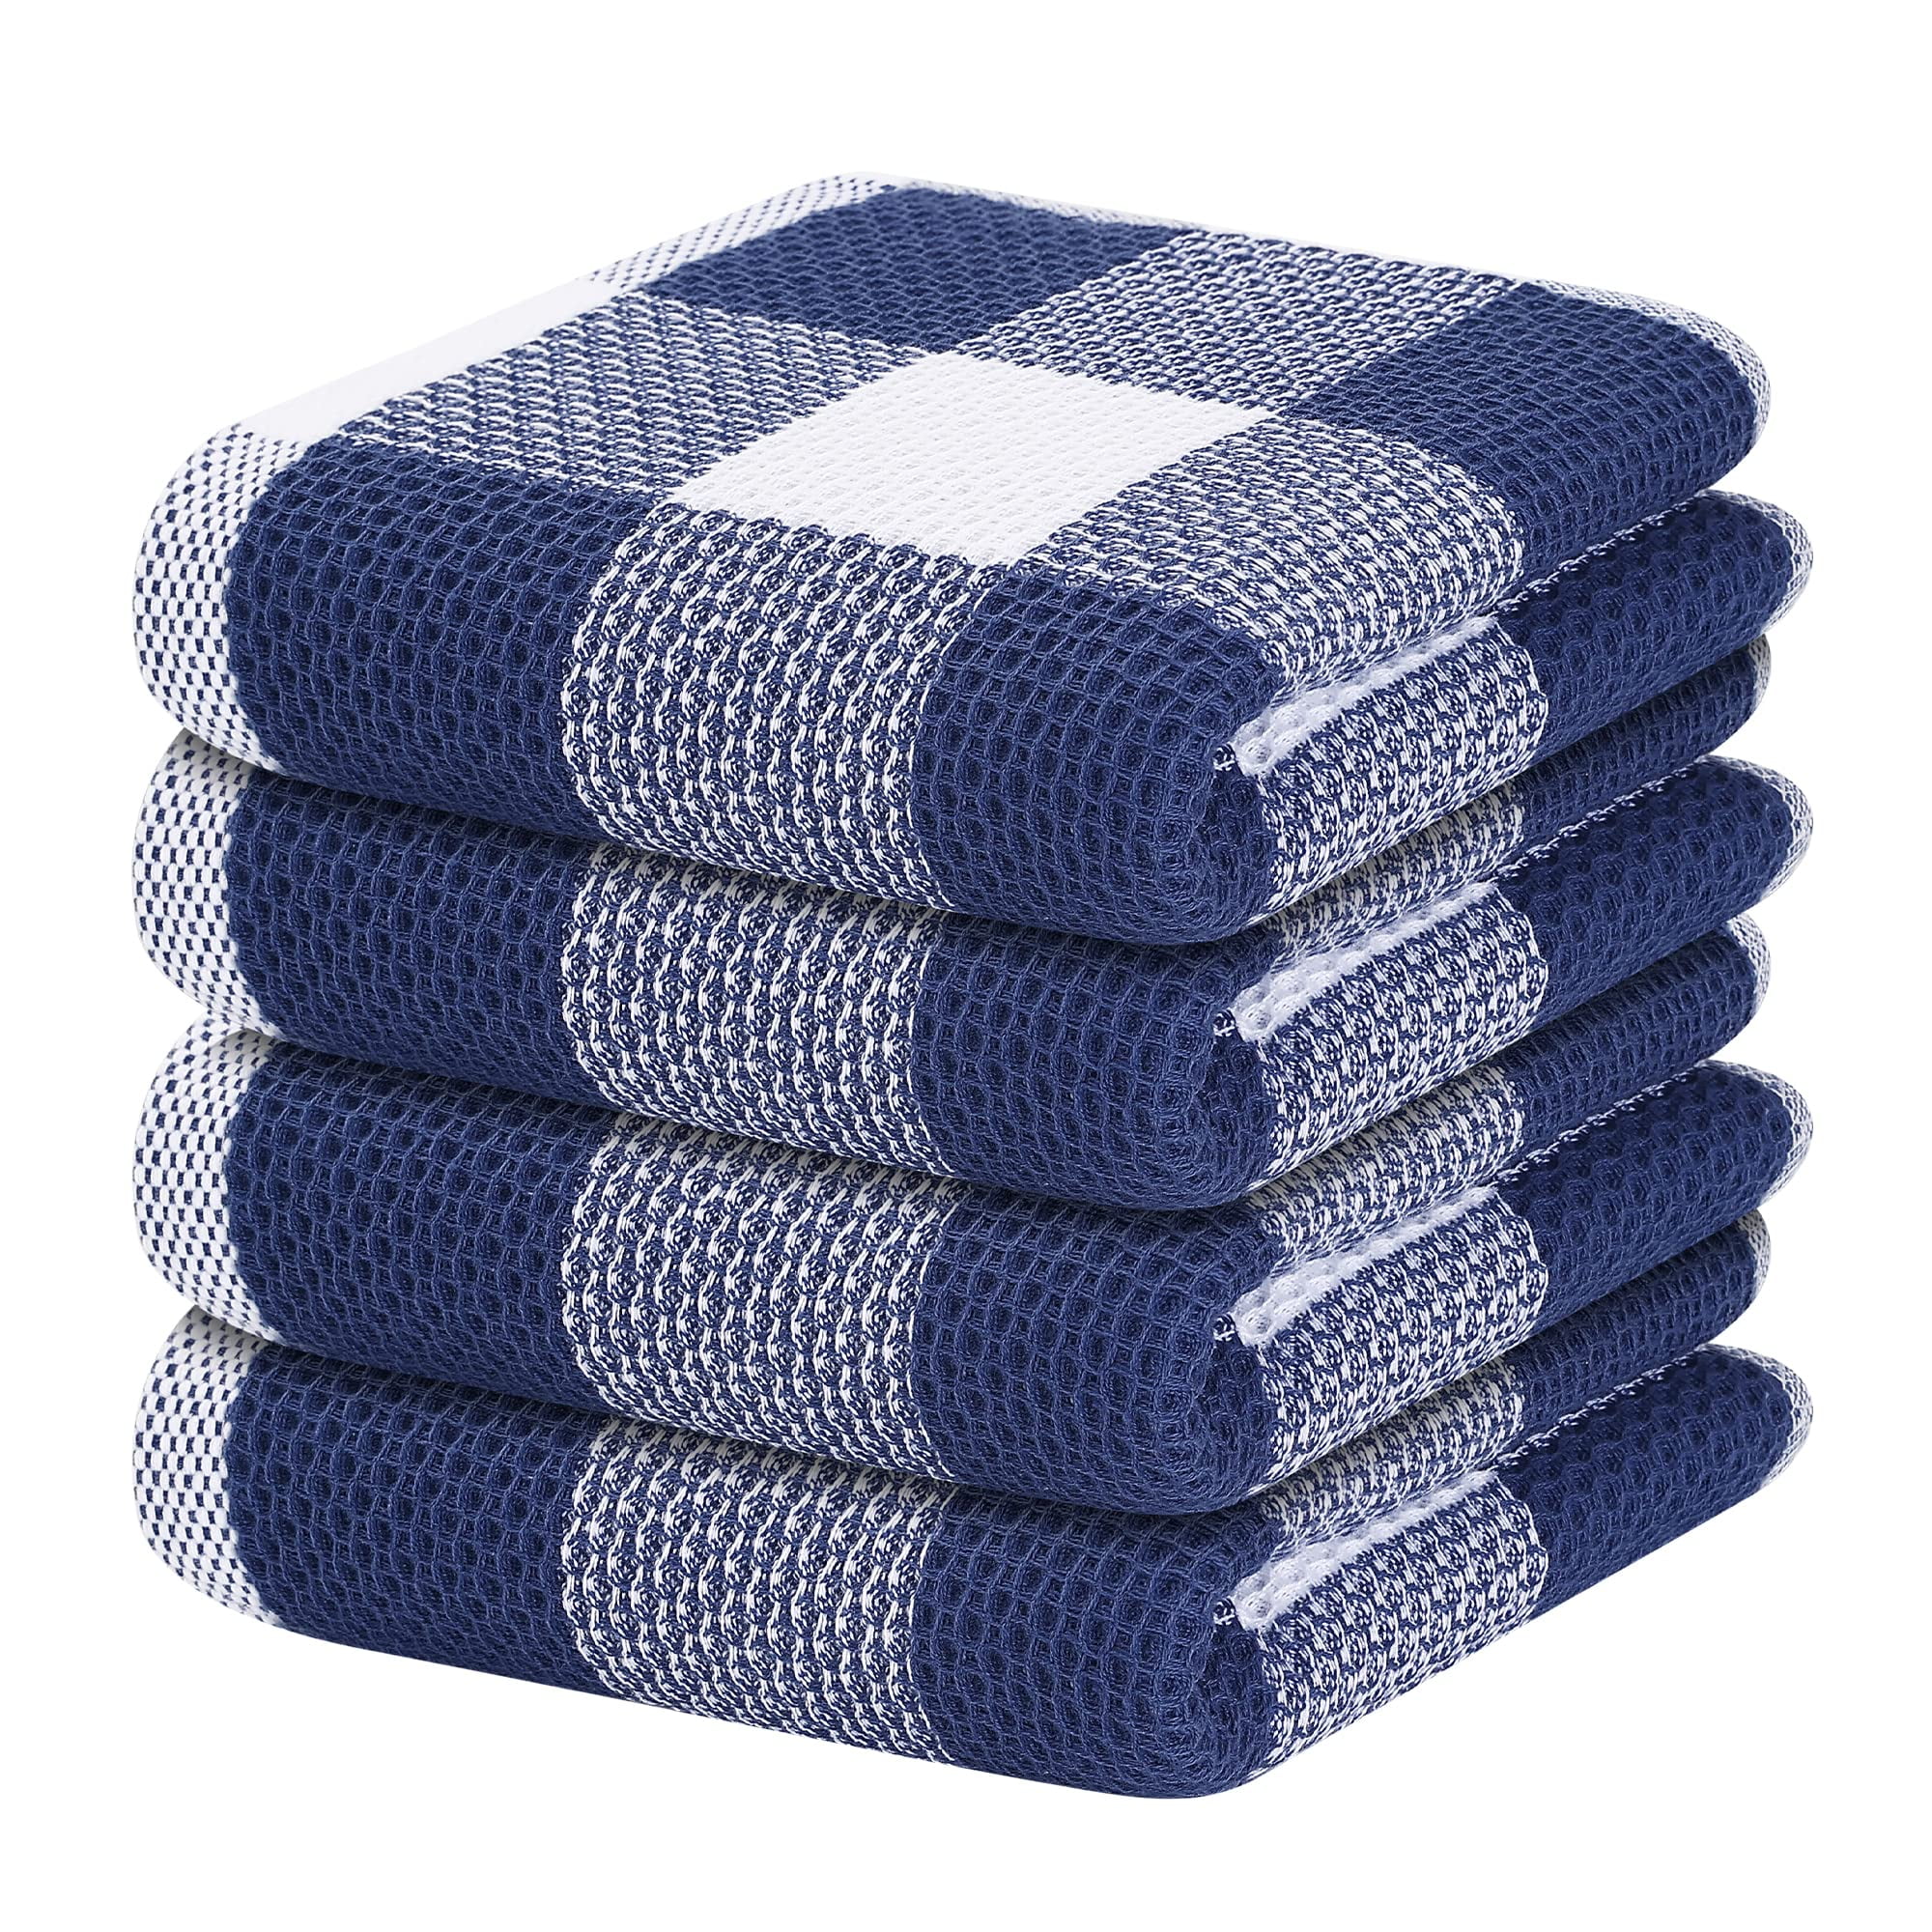 ANEWAY Kitchen Towels 100% Cotton Waffle Weave Dish Towel for Cleaning  Drying Dishes Extra Absorbent and Soft, Dish Cloth,13 x 28 in(Beige-4 Pack)